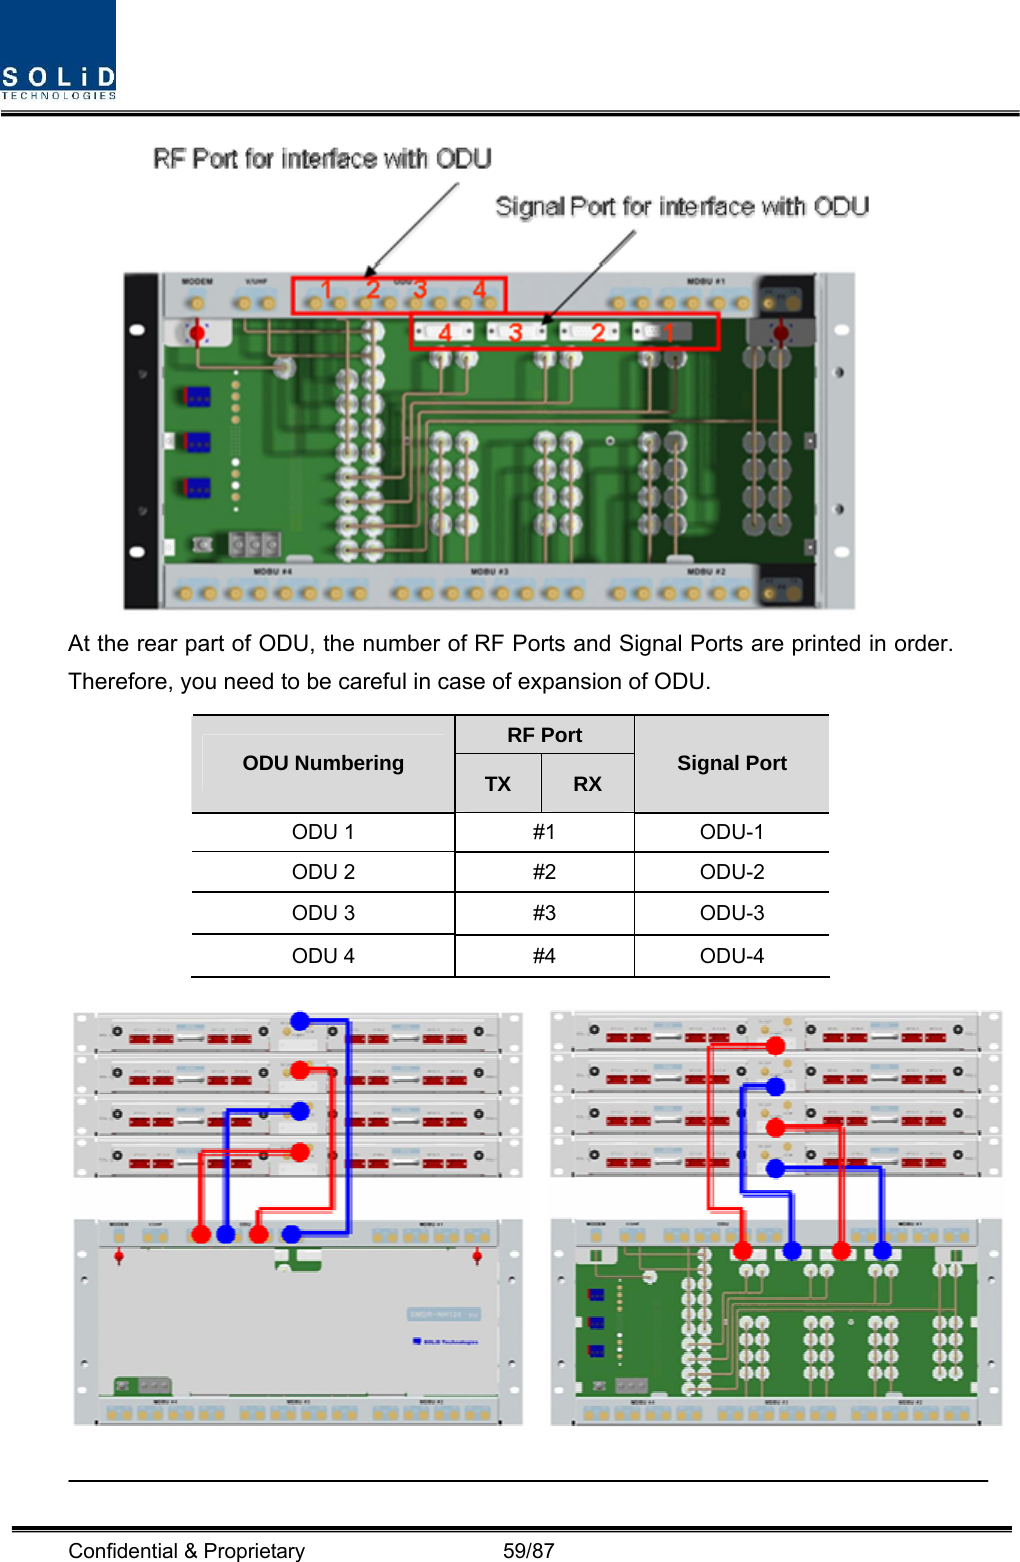  Confidential &amp; Proprietary                   59/87  At the rear part of ODU, the number of RF Ports and Signal Ports are printed in order. Therefore, you need to be careful in case of expansion of ODU.           RF Port ODU Numbering  TX  RX  Signal Port ODU 1  #1  ODU-1 ODU 2  #2  ODU-2 ODU 3  #3  ODU-3 ODU 4  #4  ODU-4 